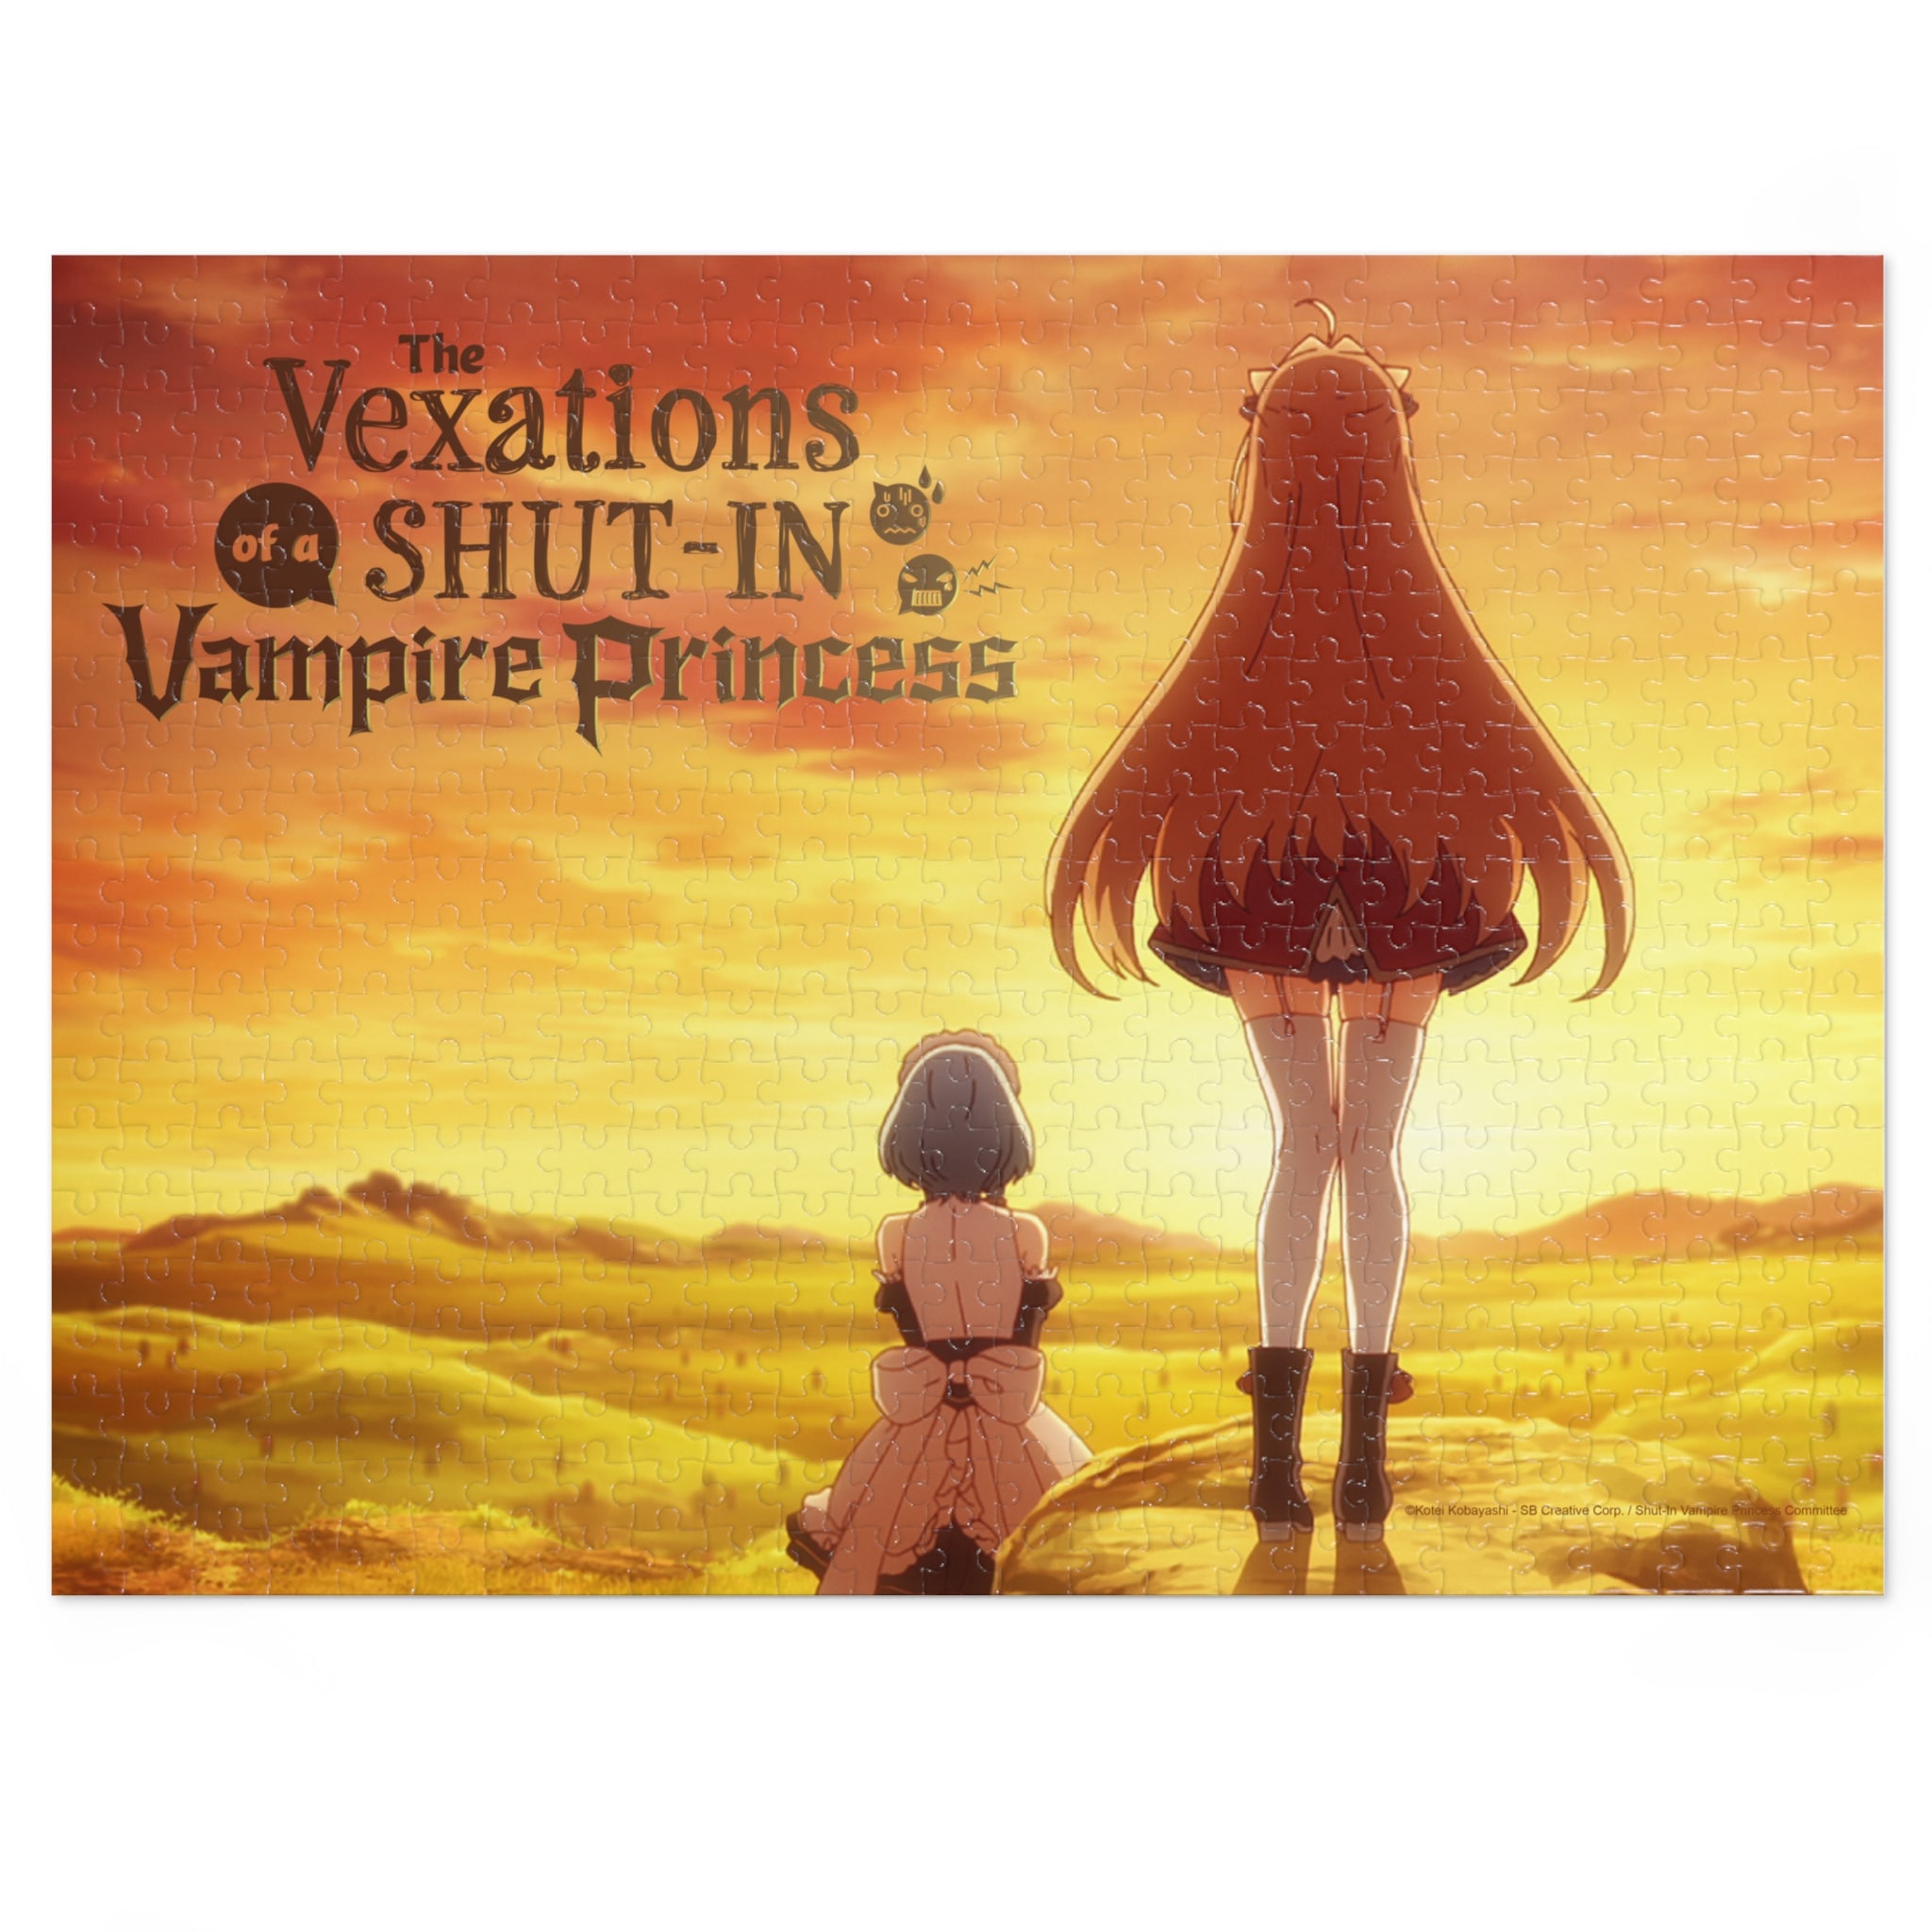 The Vexations of a Shut-In Vampire Princess - Jigsaw Puzzle (500 piece)